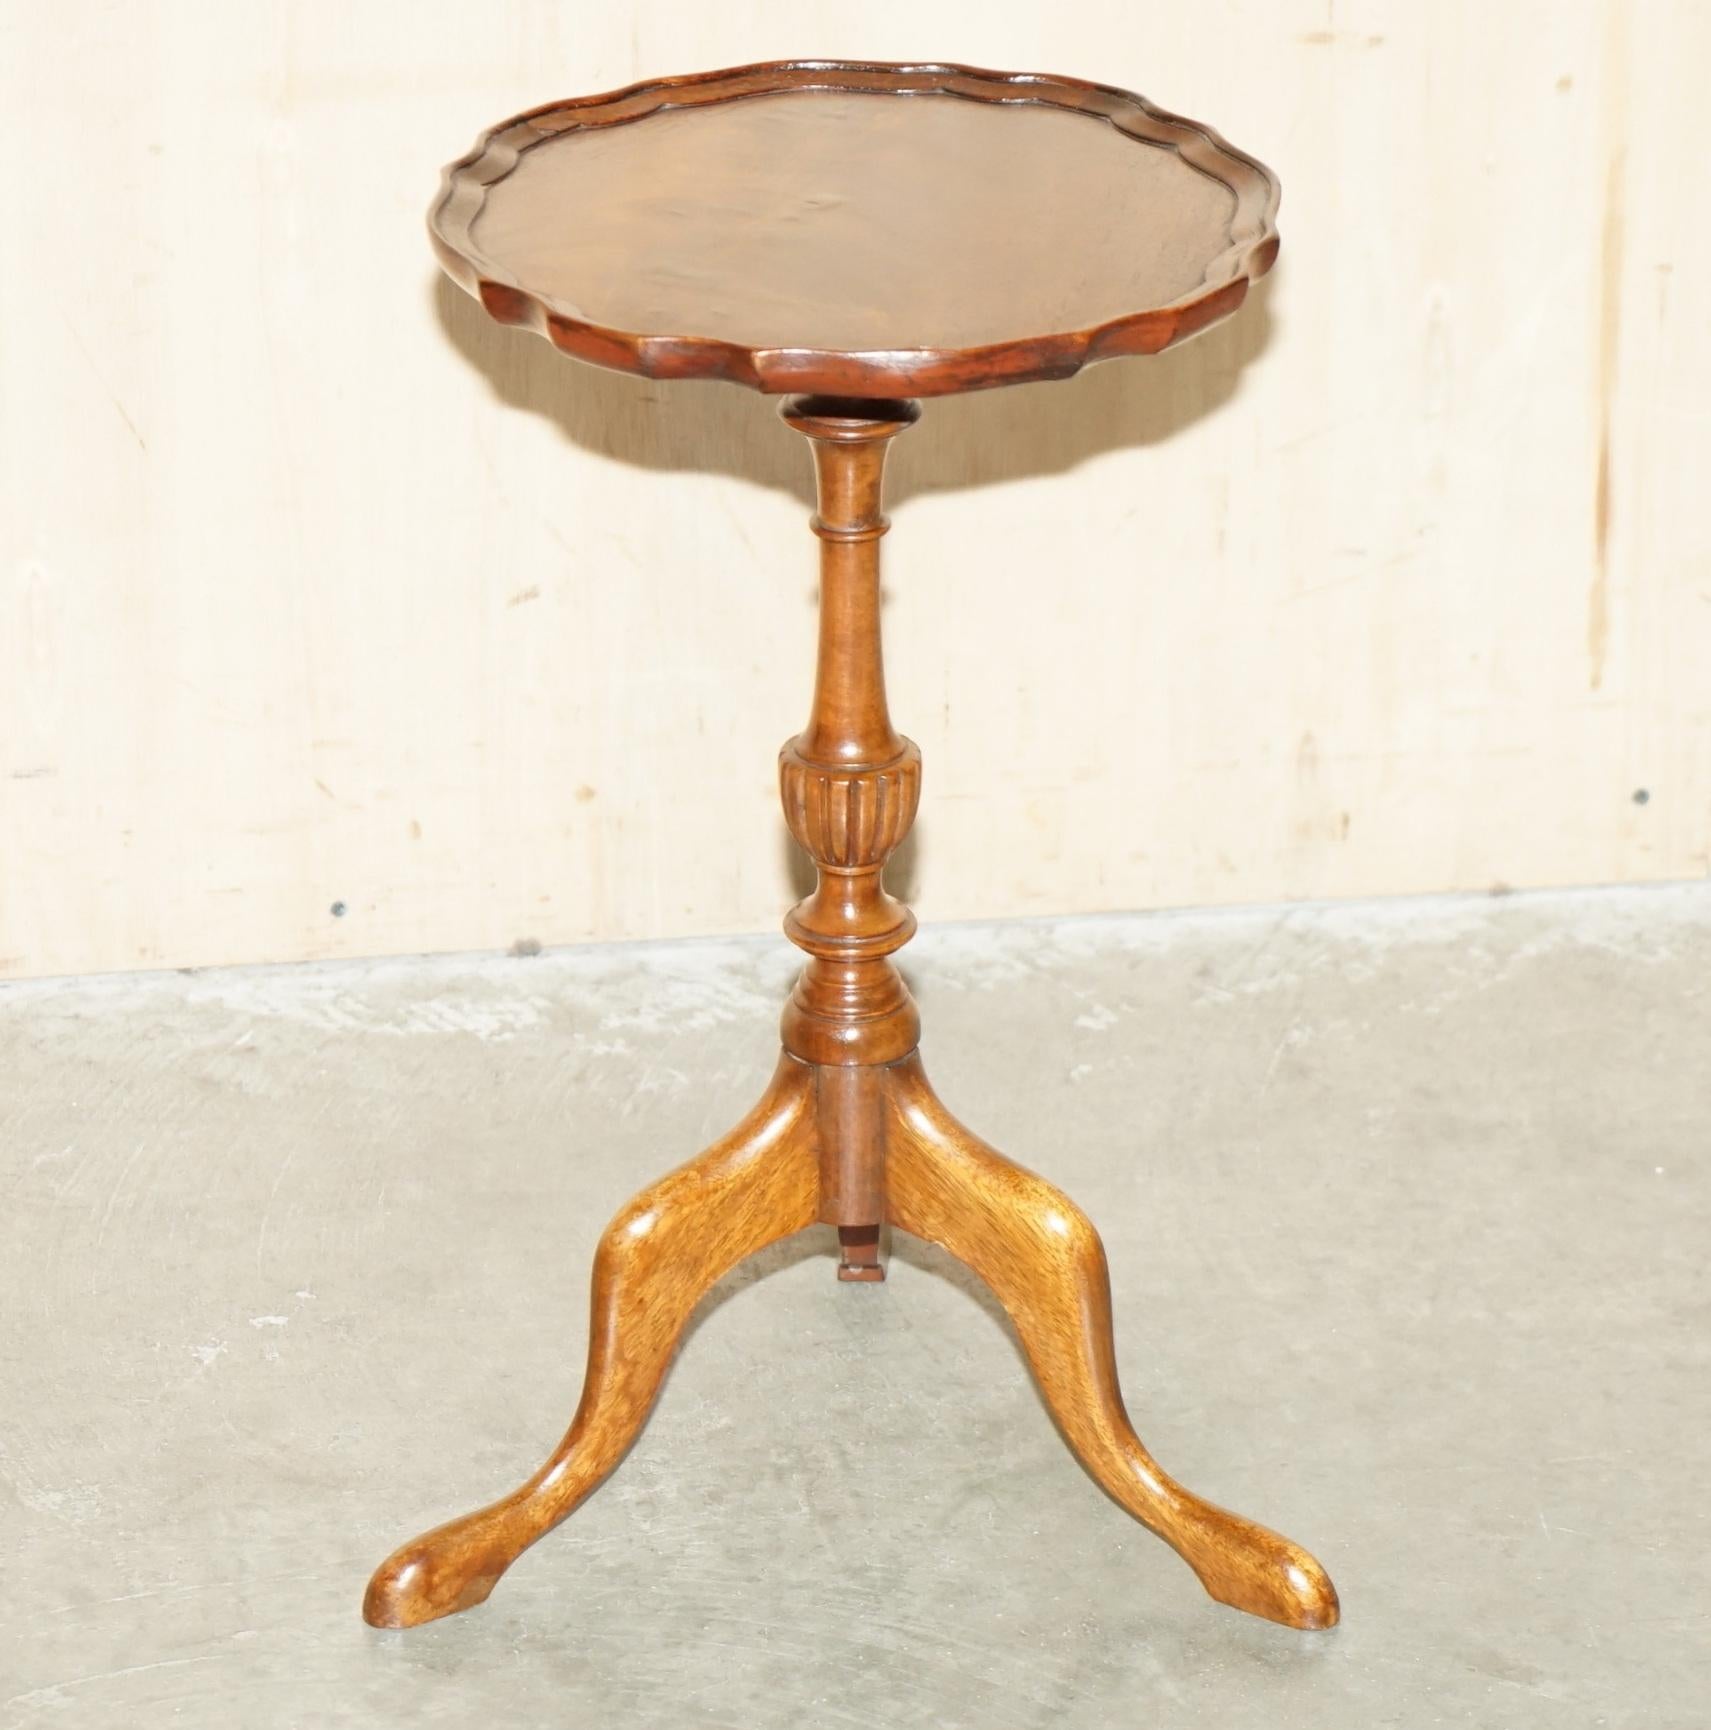 Royal House Antiques

Royal House Antiques is delighted to offer for sale this stunning pair of vintage, fully restored, flamed Mahogany Pie crust edge lamp or side tables

A good-looking well-made pair of tripod tables in lovely order, my French